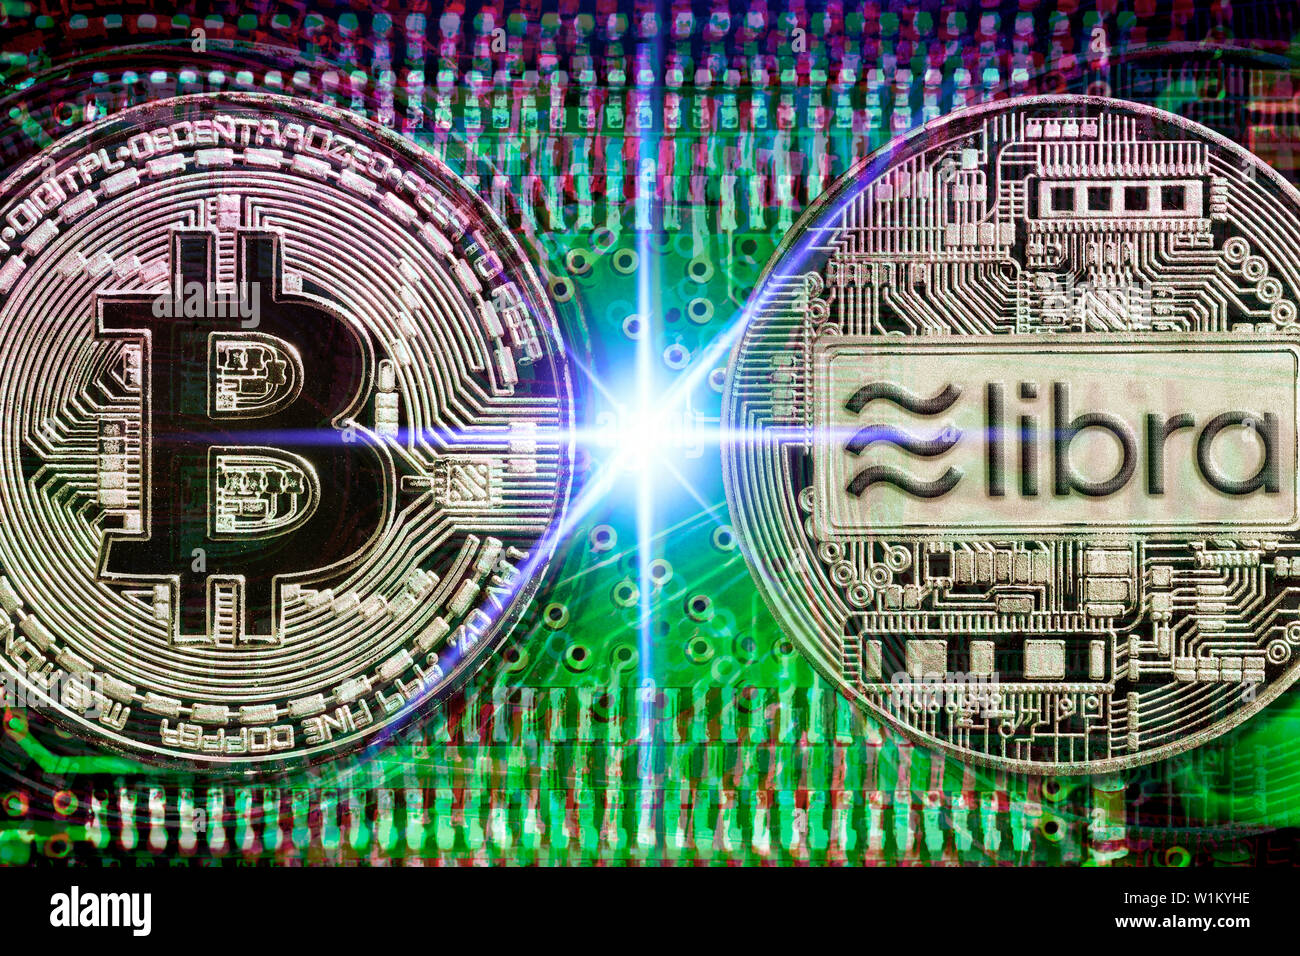 Bitcoin and libra cryptocurrency coins on computer circuit board Stock Photo